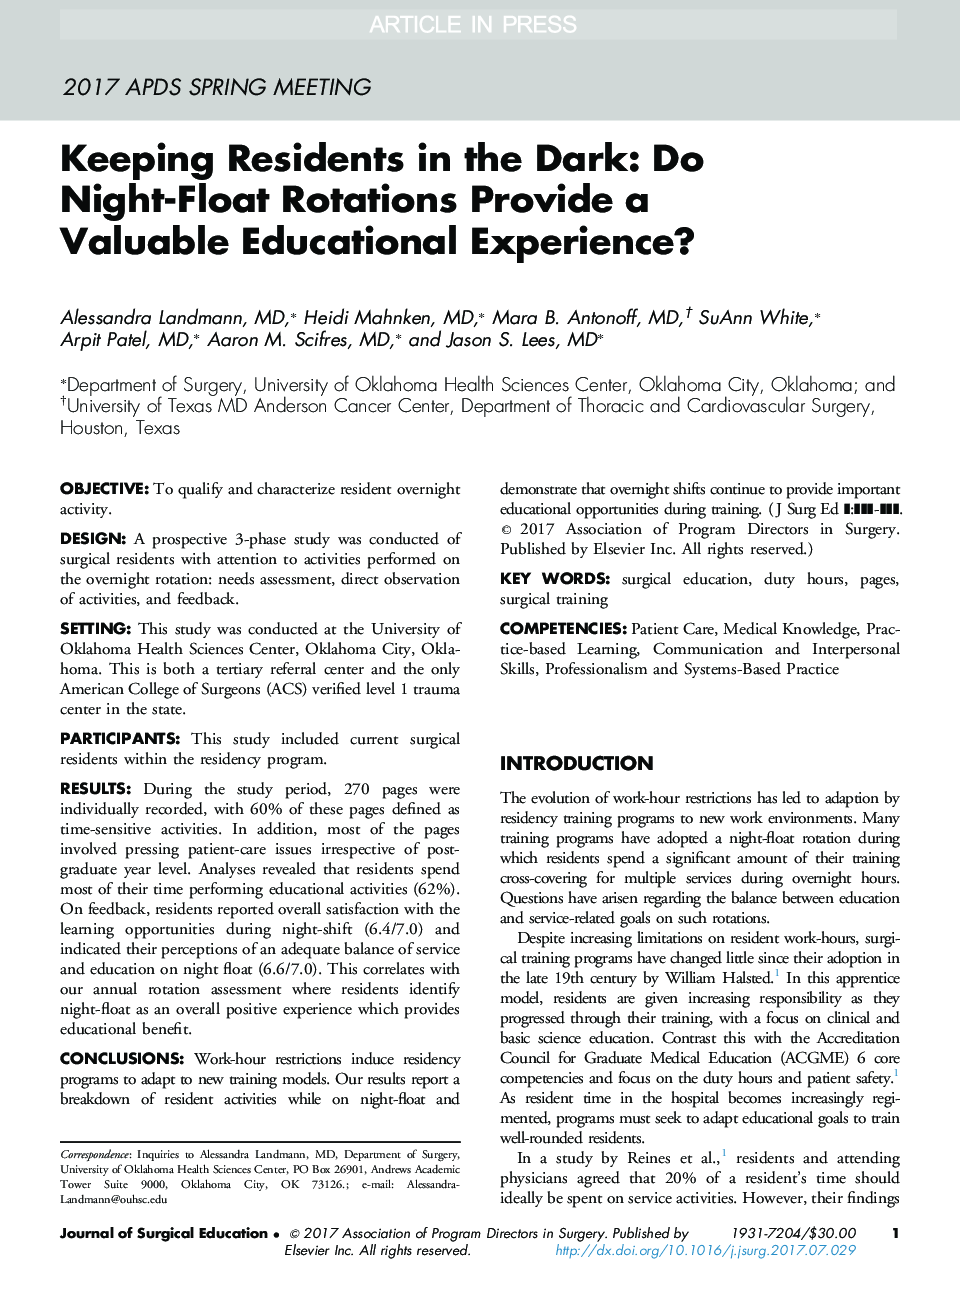 Keeping Residents in the Dark: Do Night-Float Rotations Provide a Valuable Educational Experience?